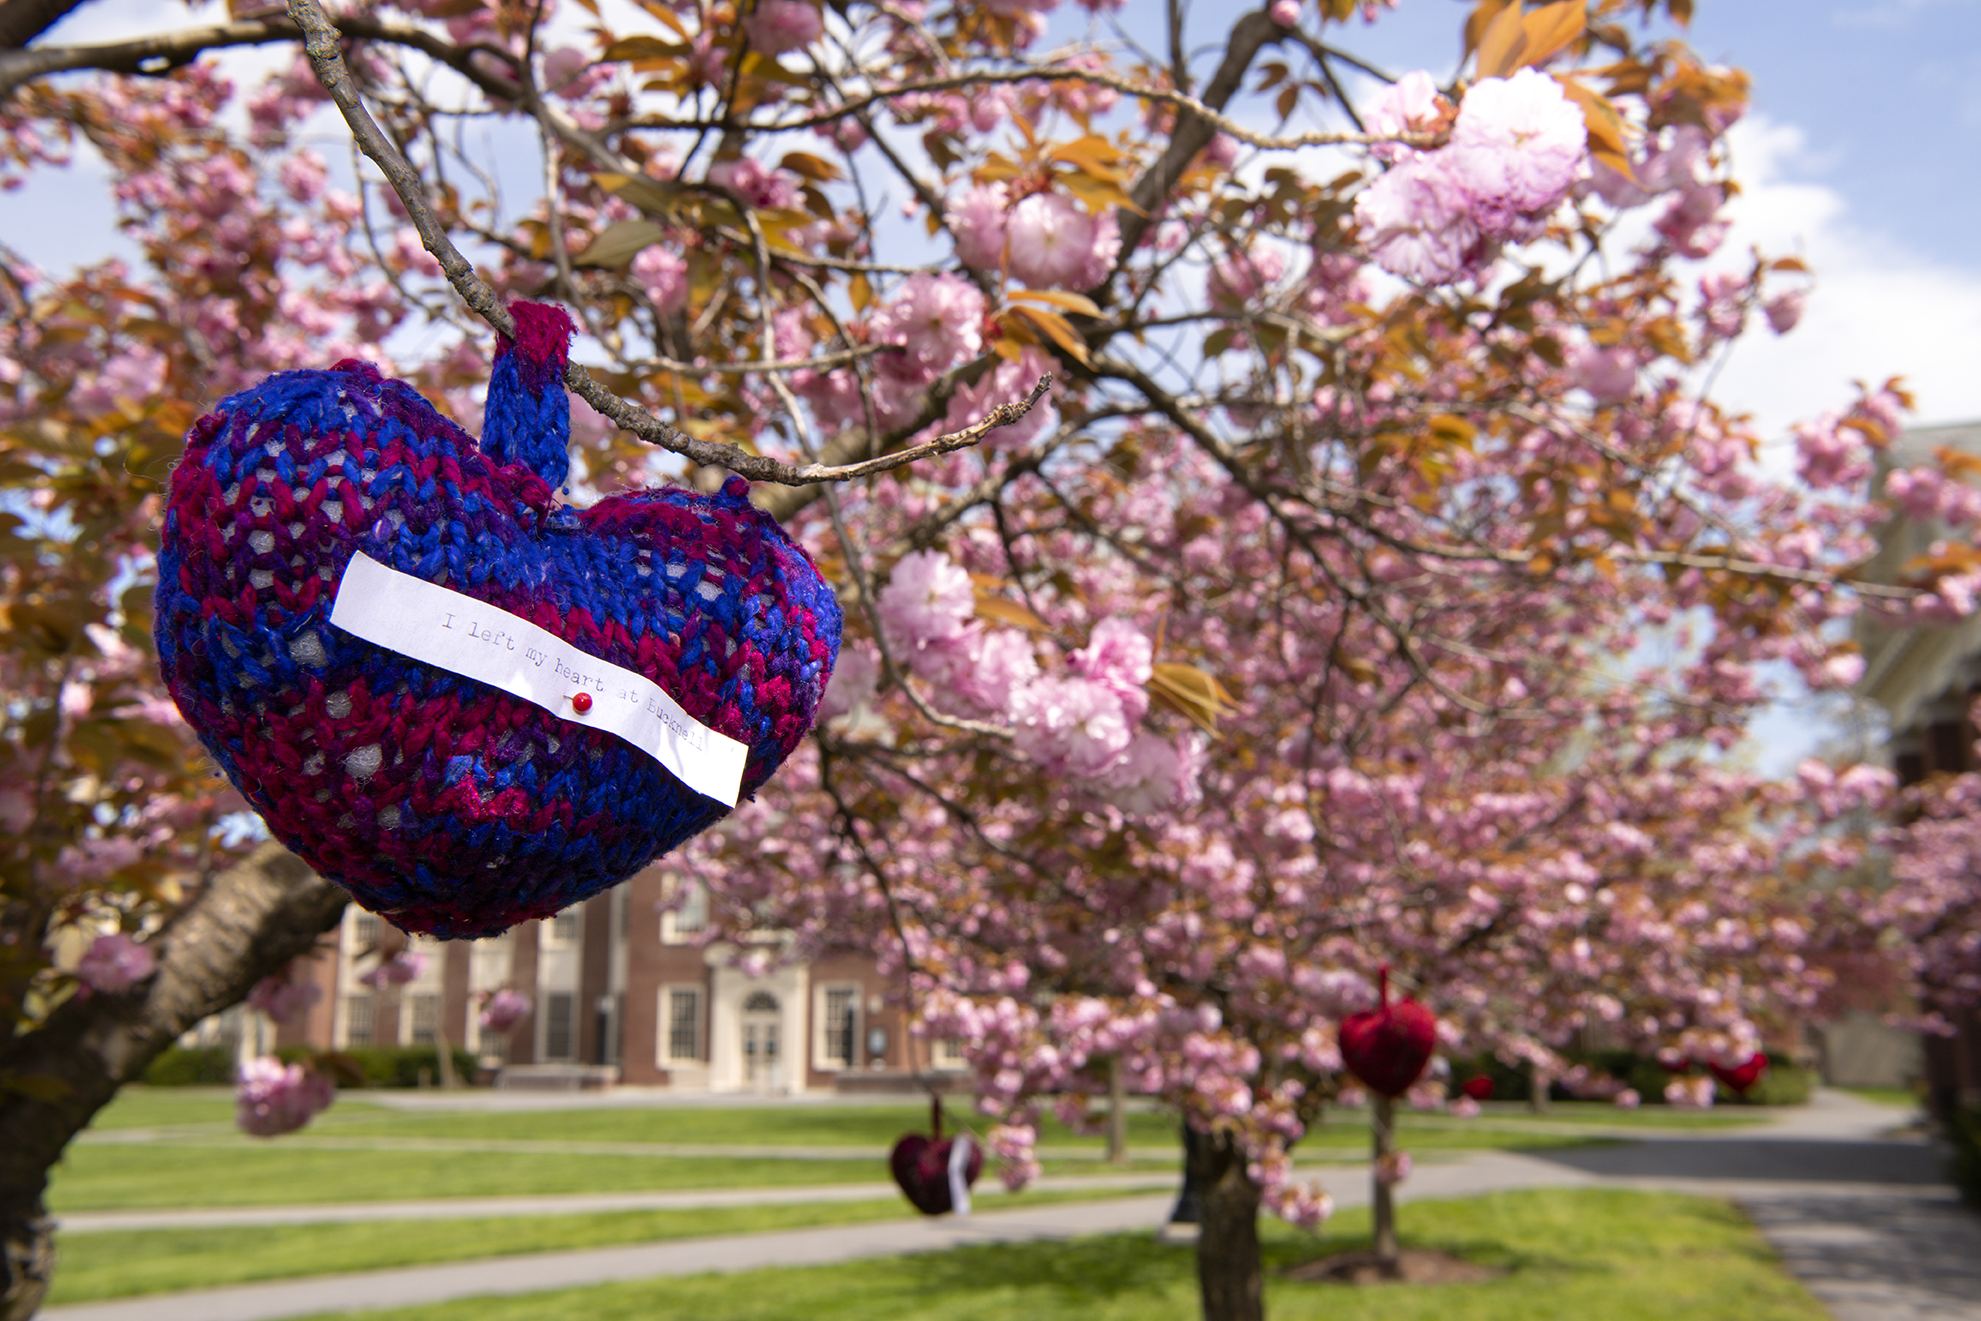 A blue and pink knitted heart ornament handing from a tree that's blooming with cherry blossoms. The heart has a small piece of paper pinned to it that says, "I left my heart at Bucknell."